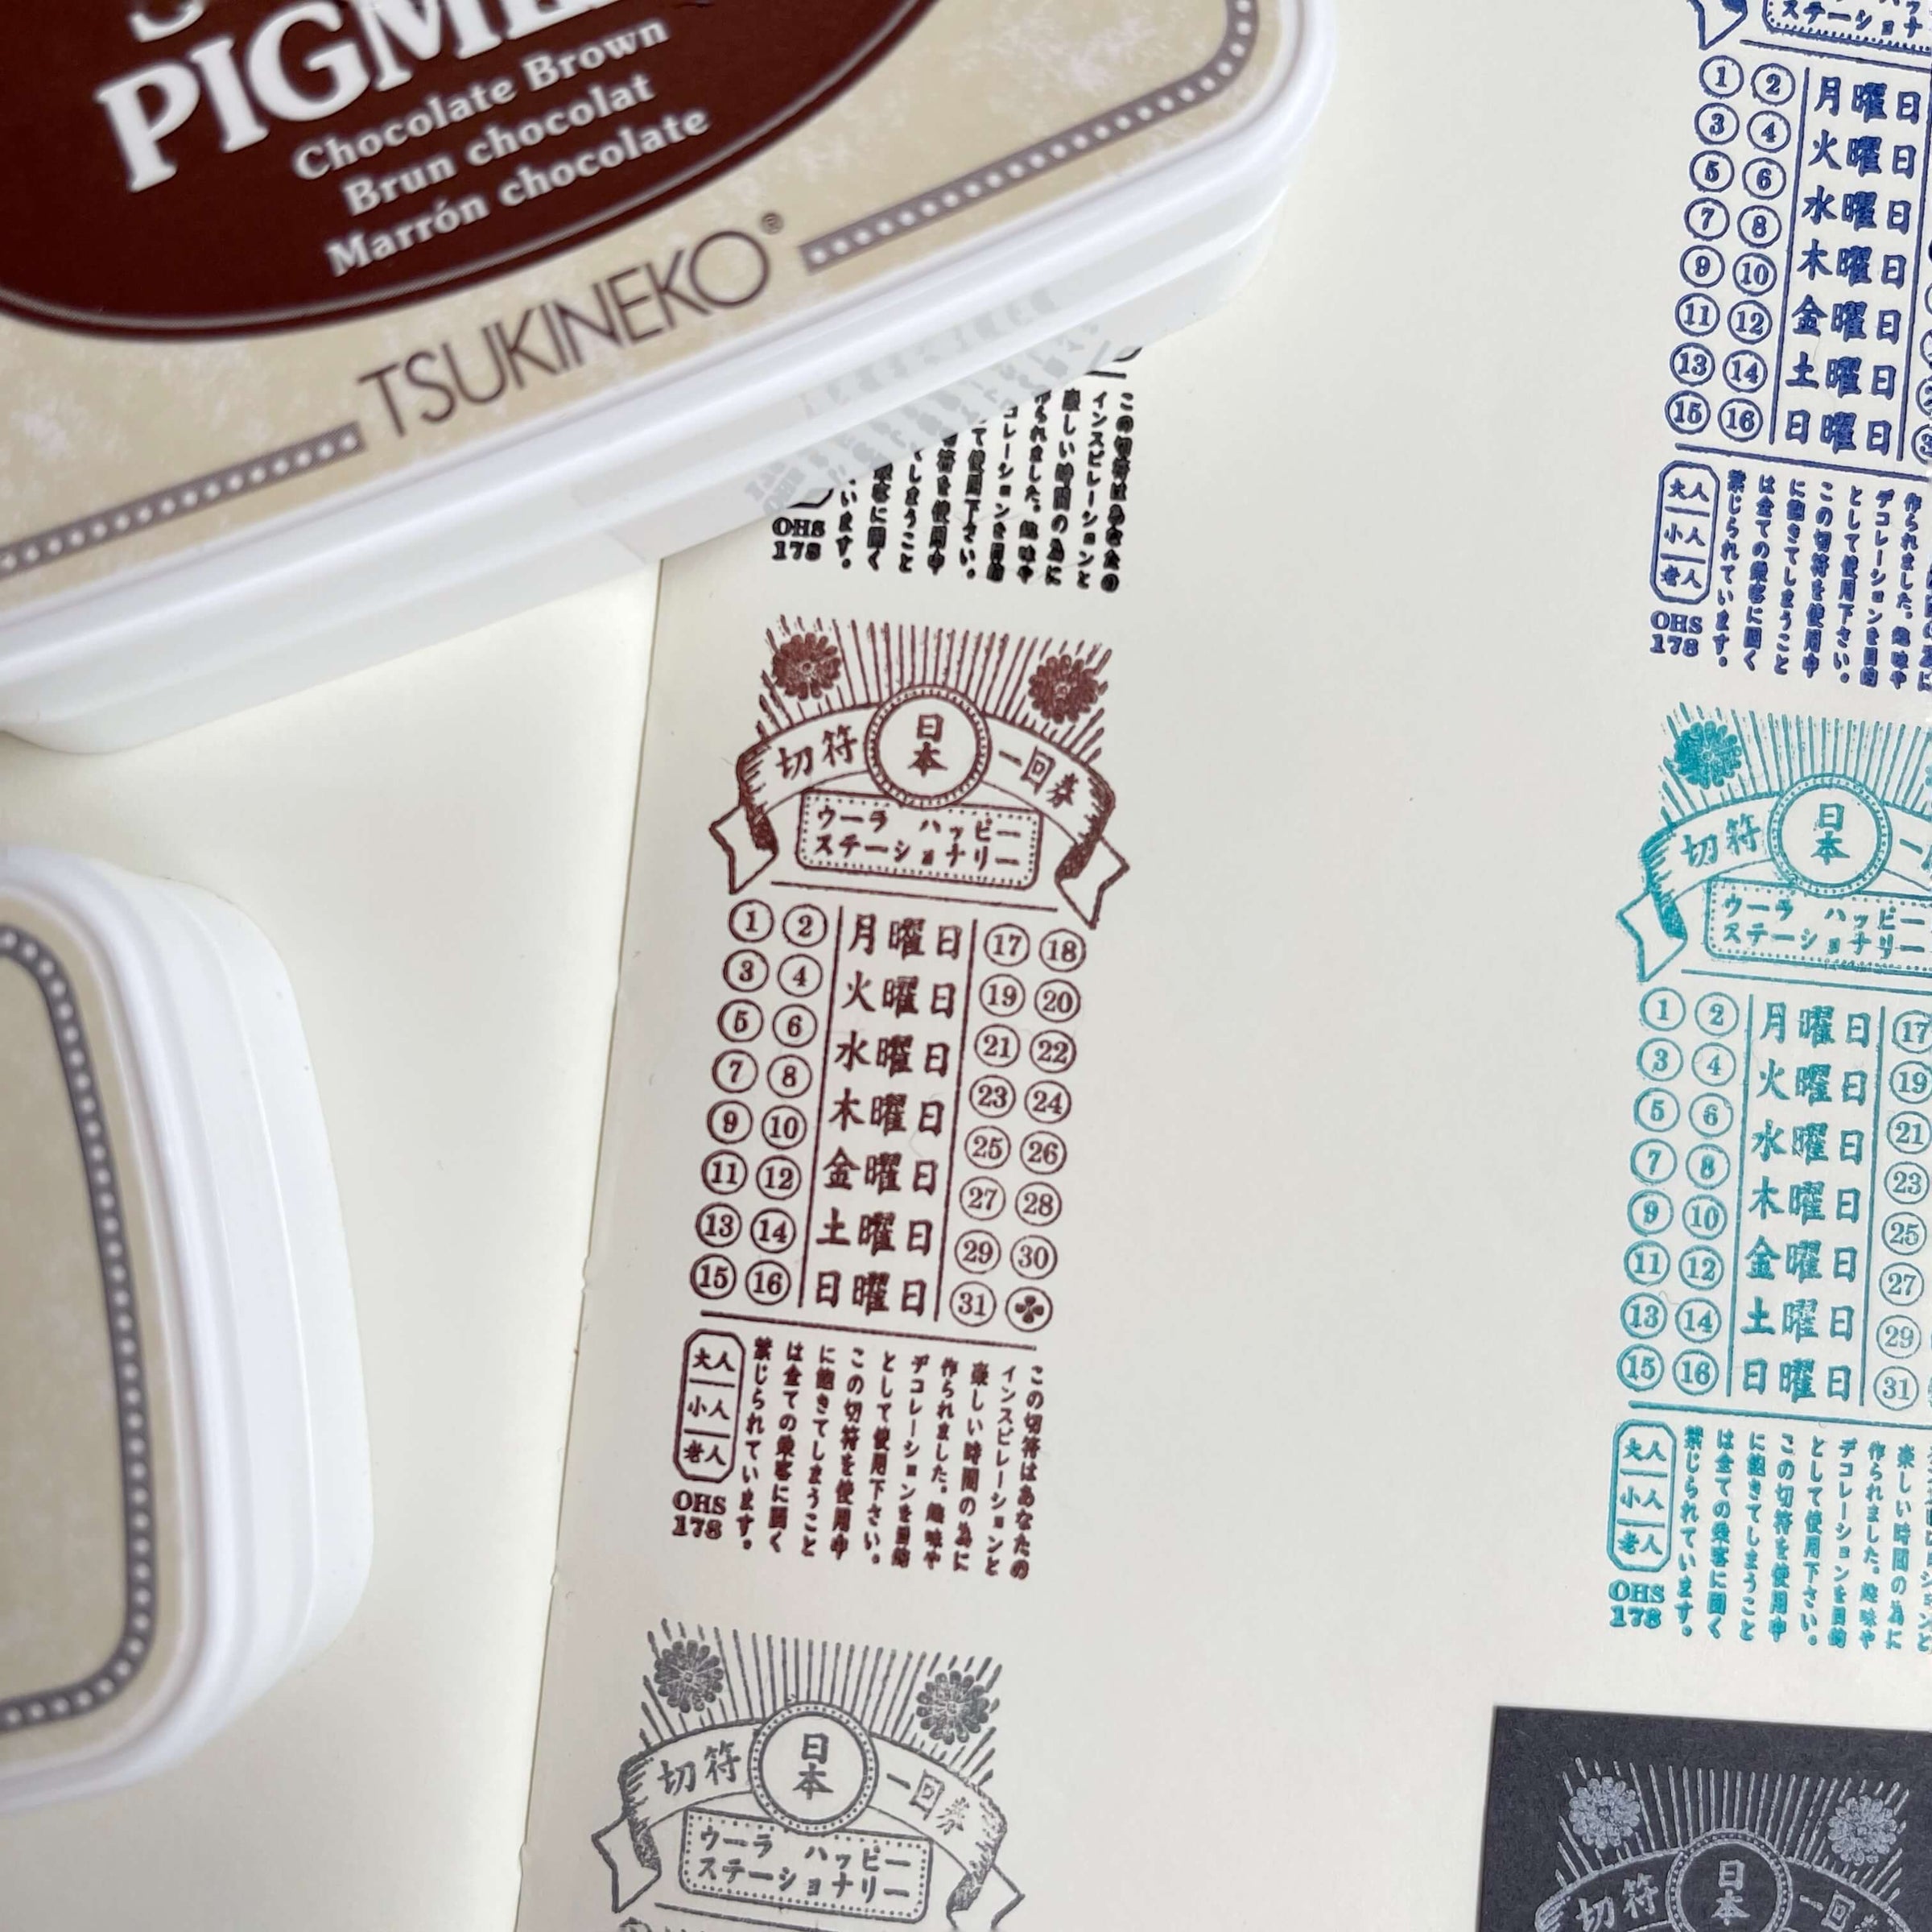 StazOn Opaque White Ink Pad – Sumthings of Mine